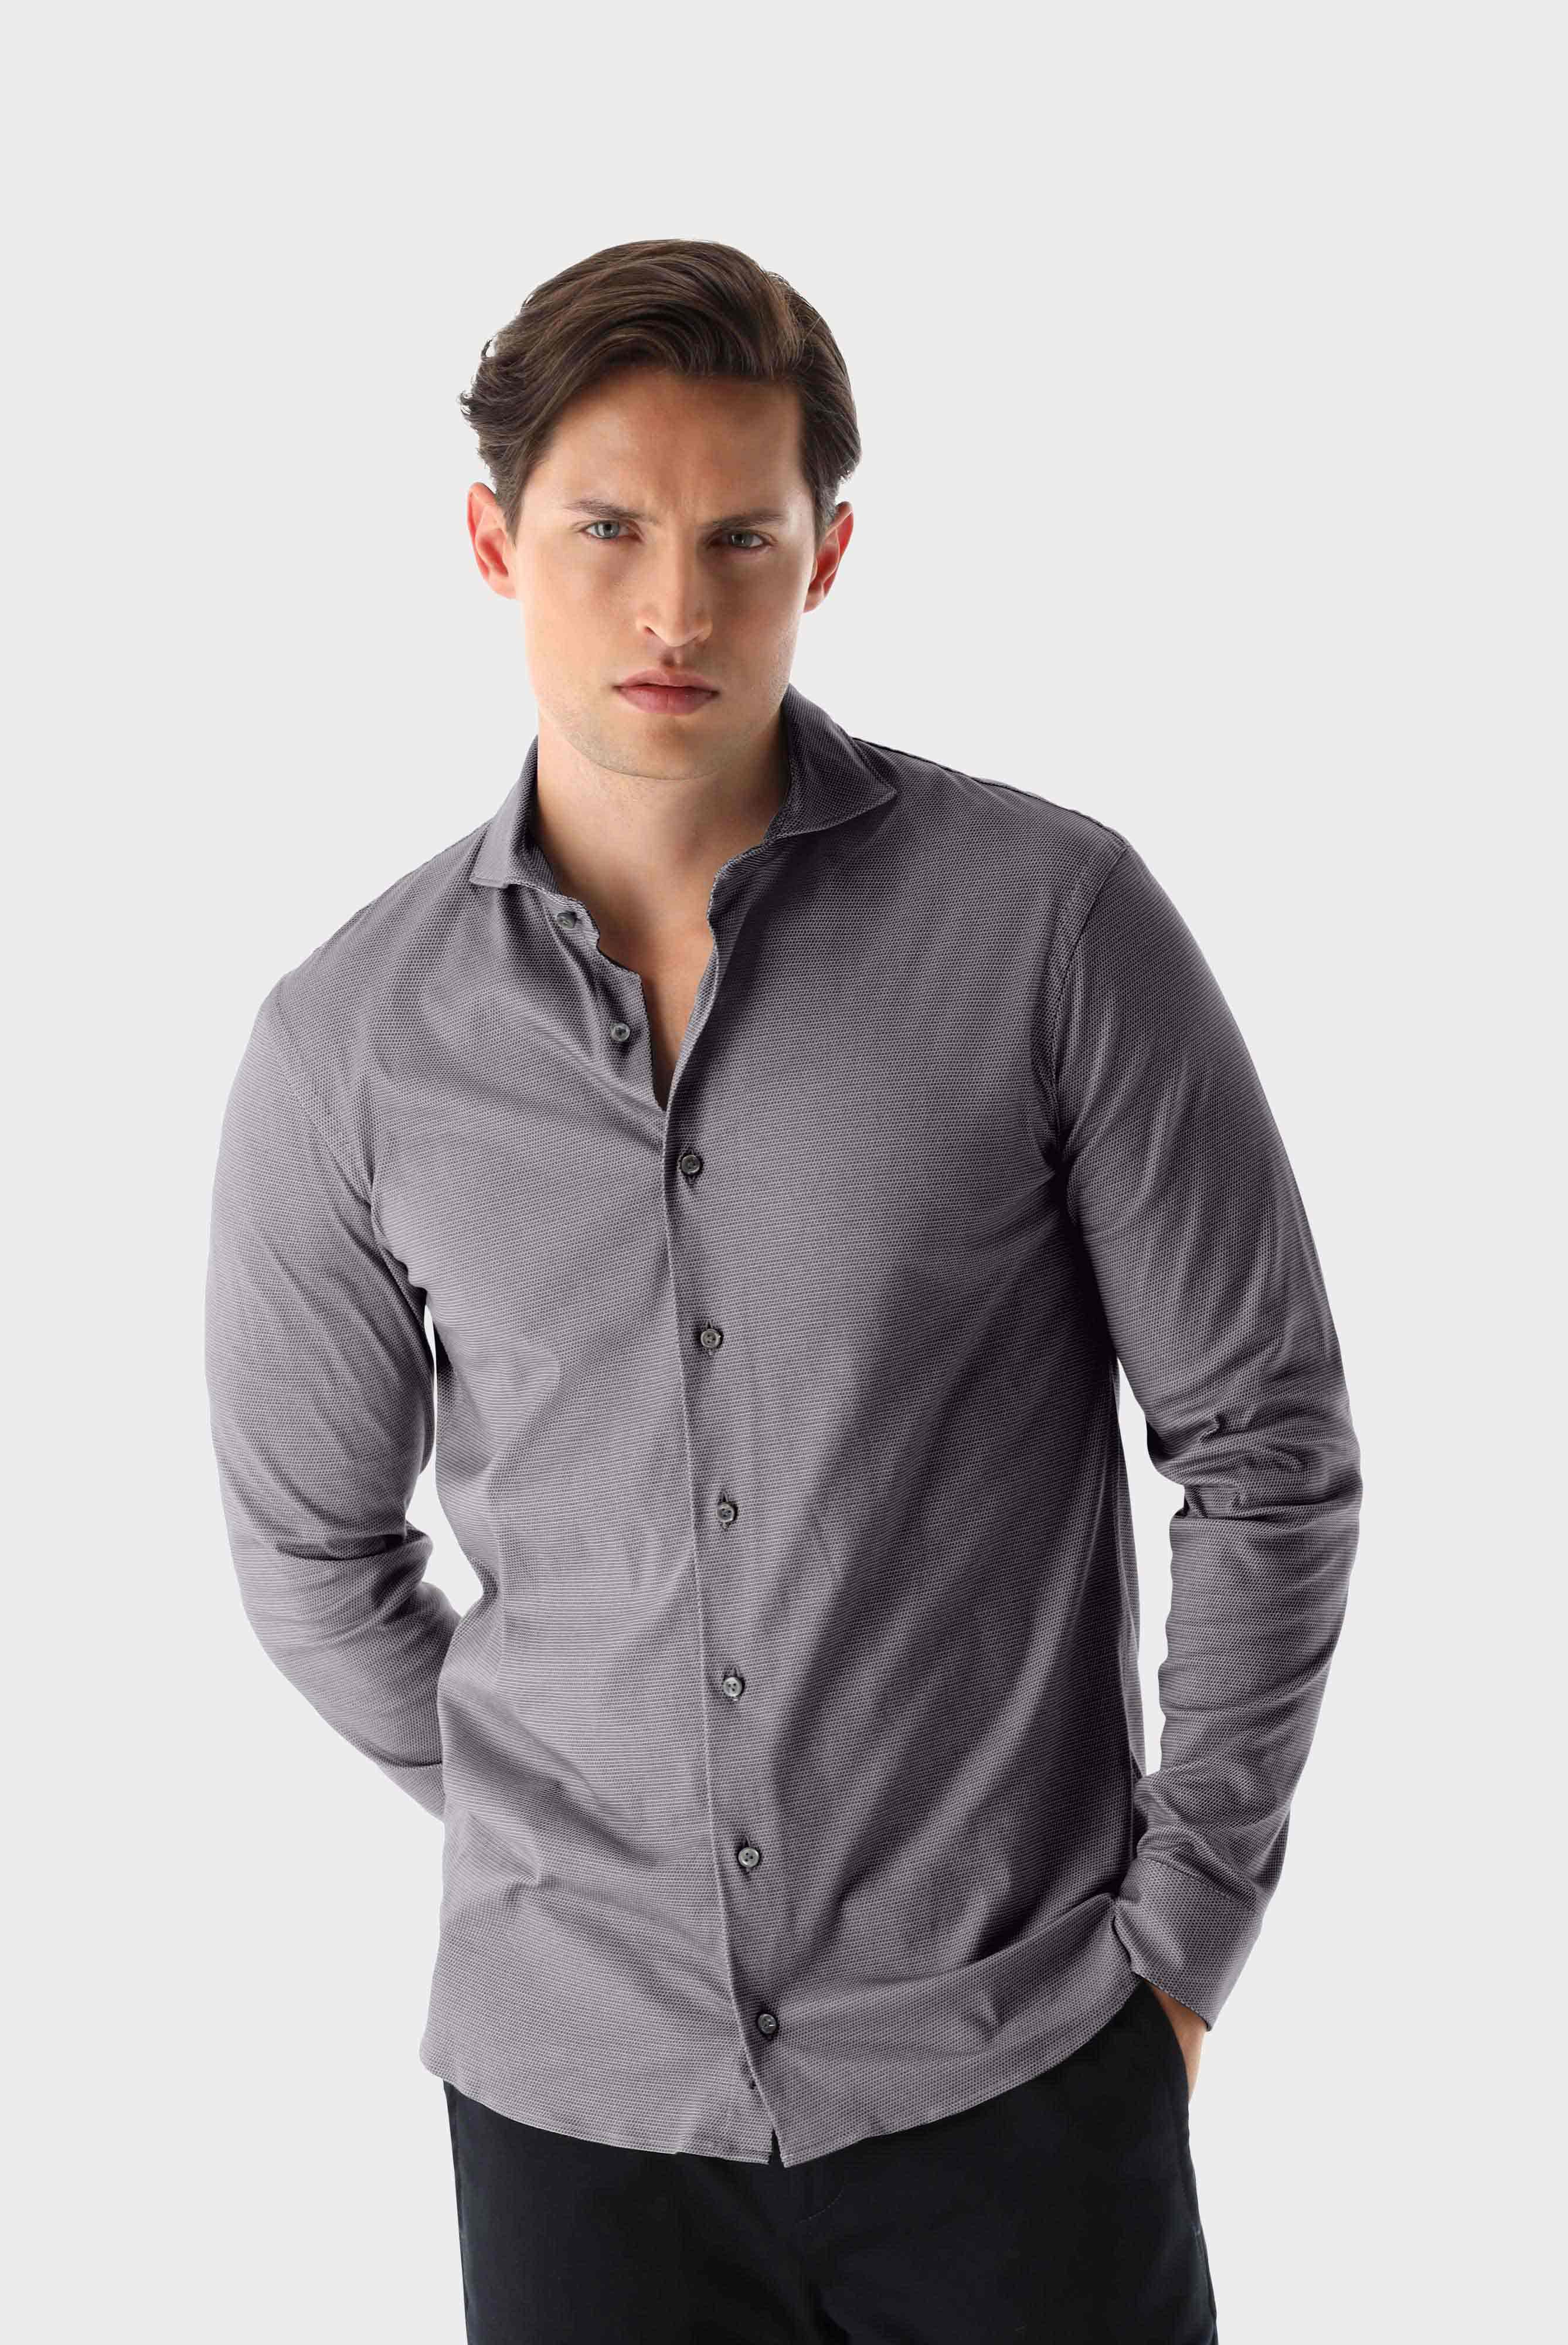 Casual Shirts+Micro Printed Jersey Shirt Tailor Fit+20.1683.UC.187551.160.M